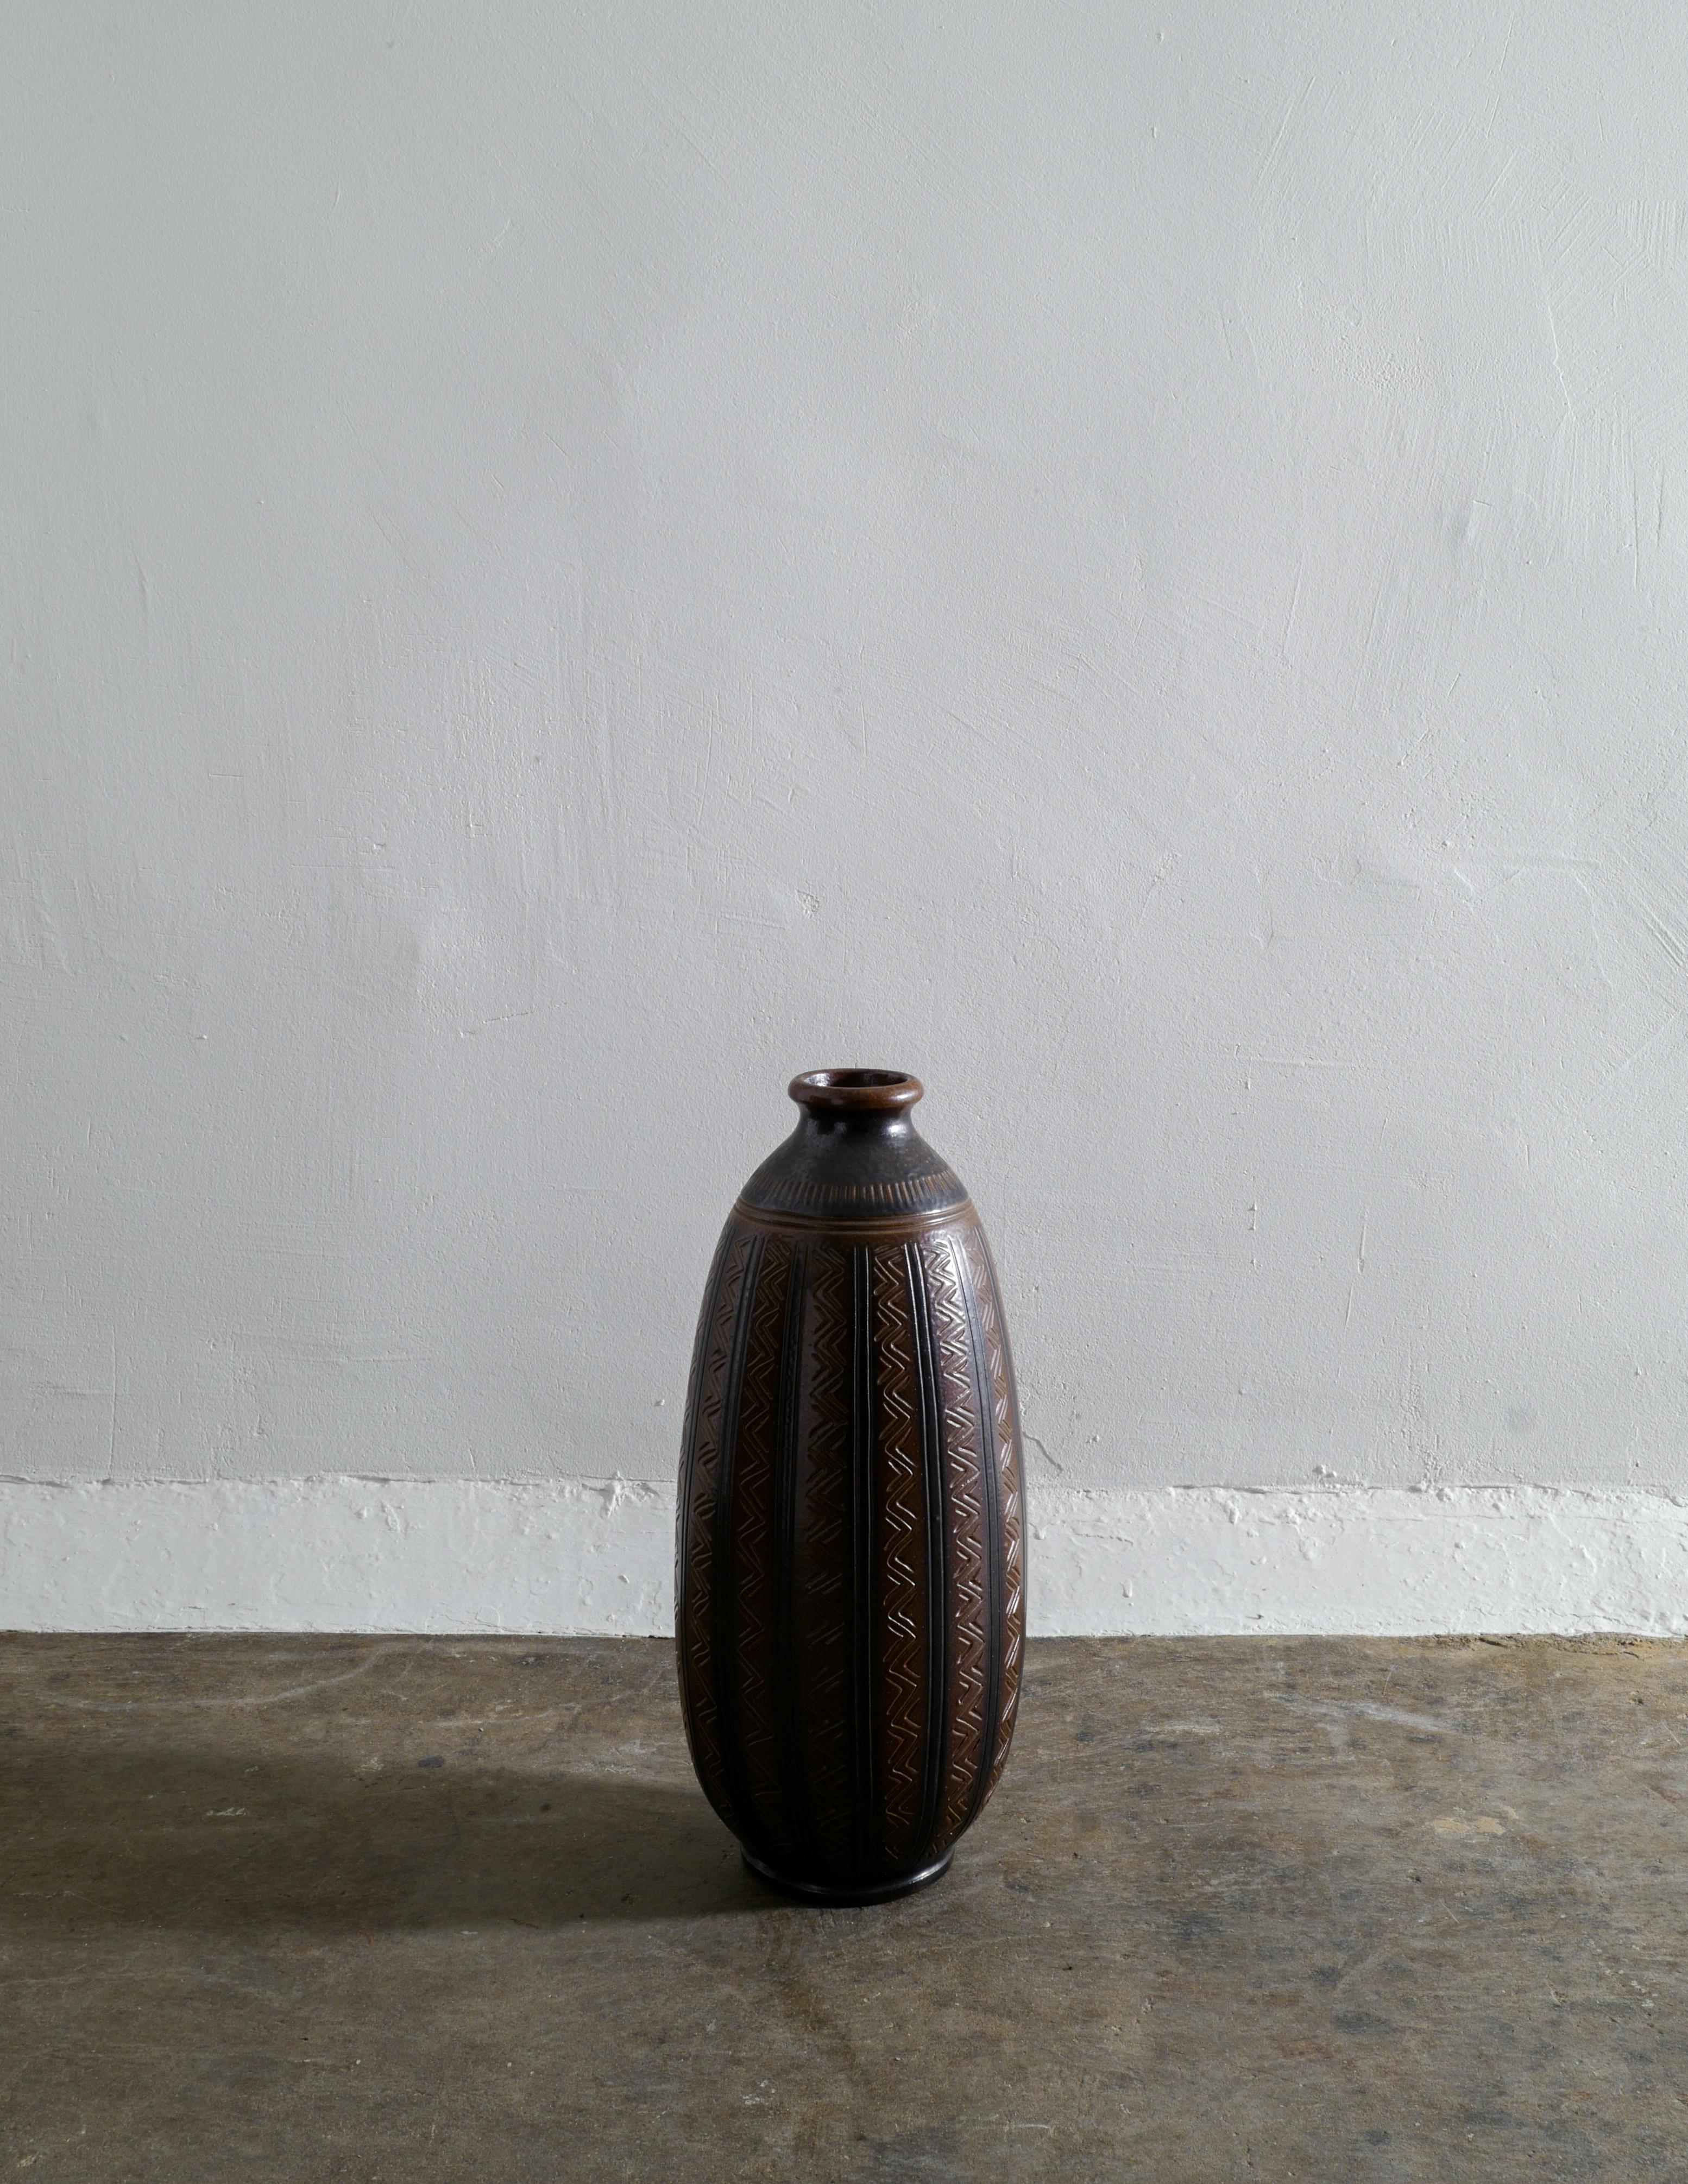 Rare floor vase by Arthur Andersson produced by Wallåkra in 1953. Double signed at the bottom including the original purchase sticker. Vase is in excellent condition close to mint with minimal signs from use.